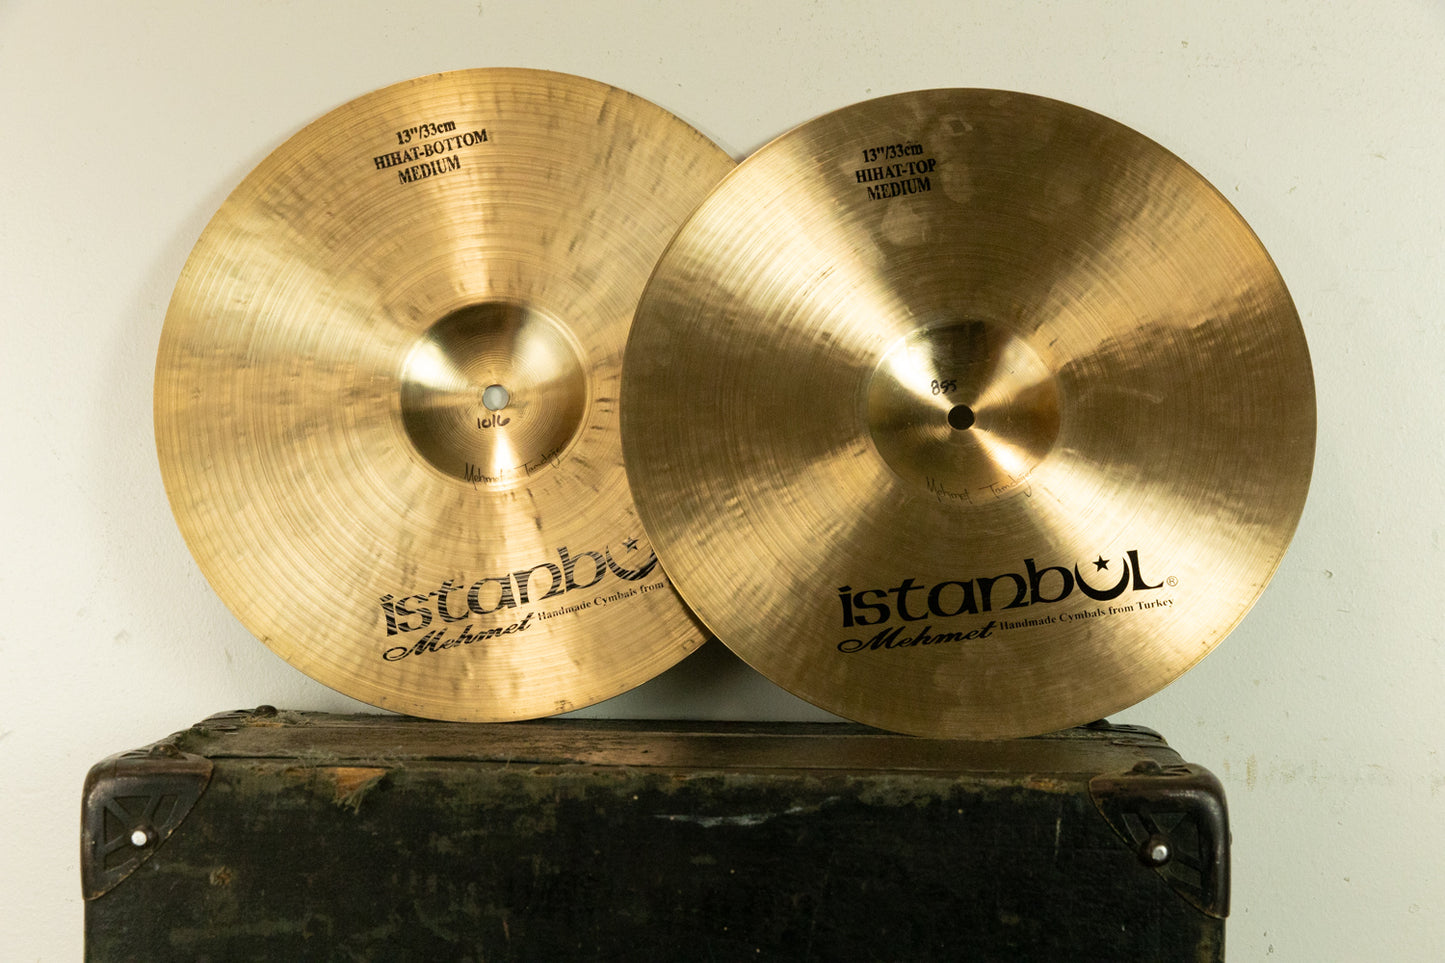 Istanbul Mehmet 13" Traditional Hi-Hat Flat Hole Cymbals 855g 1016g